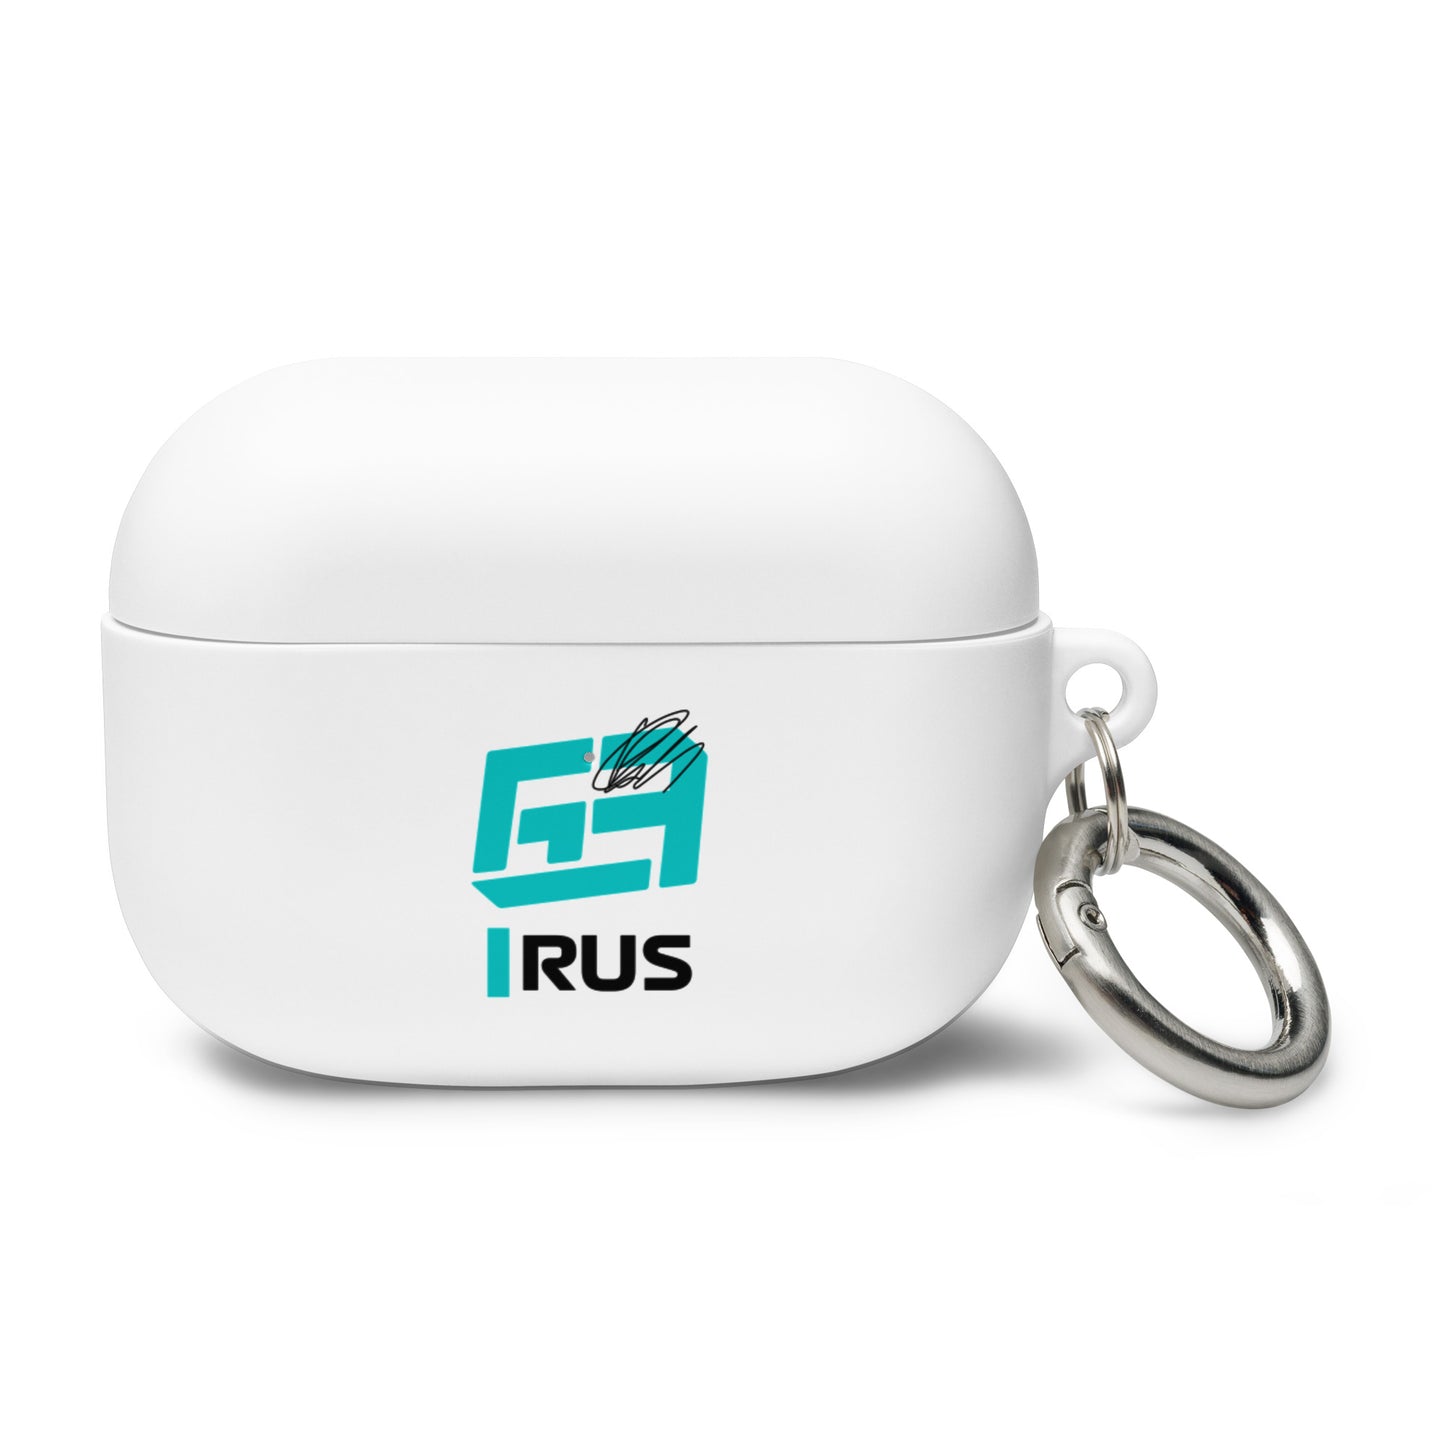 george russell airpods pro case white